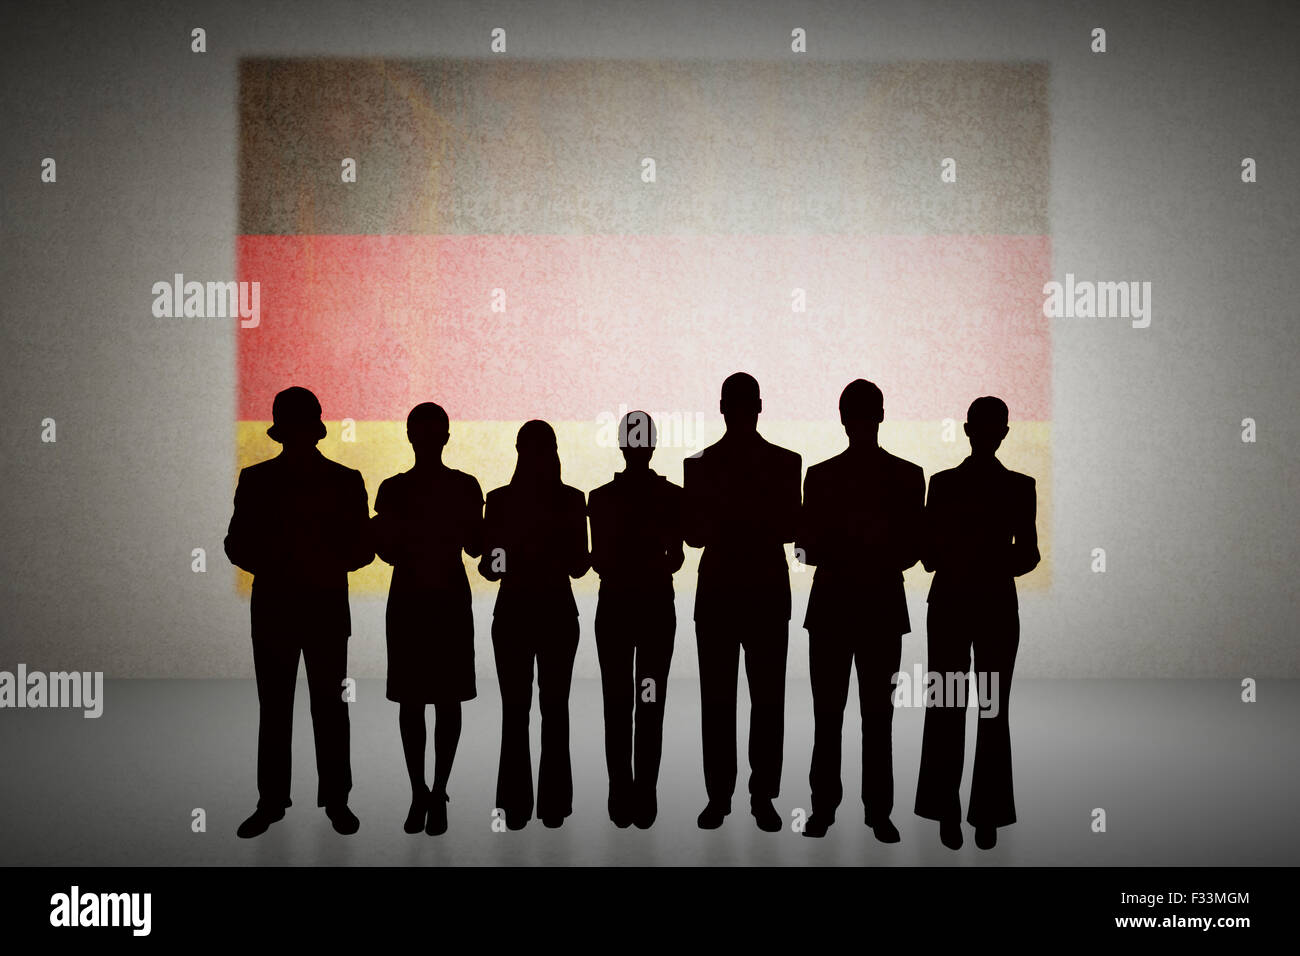 Composite image of silhouette of business people in a row Stock Photo